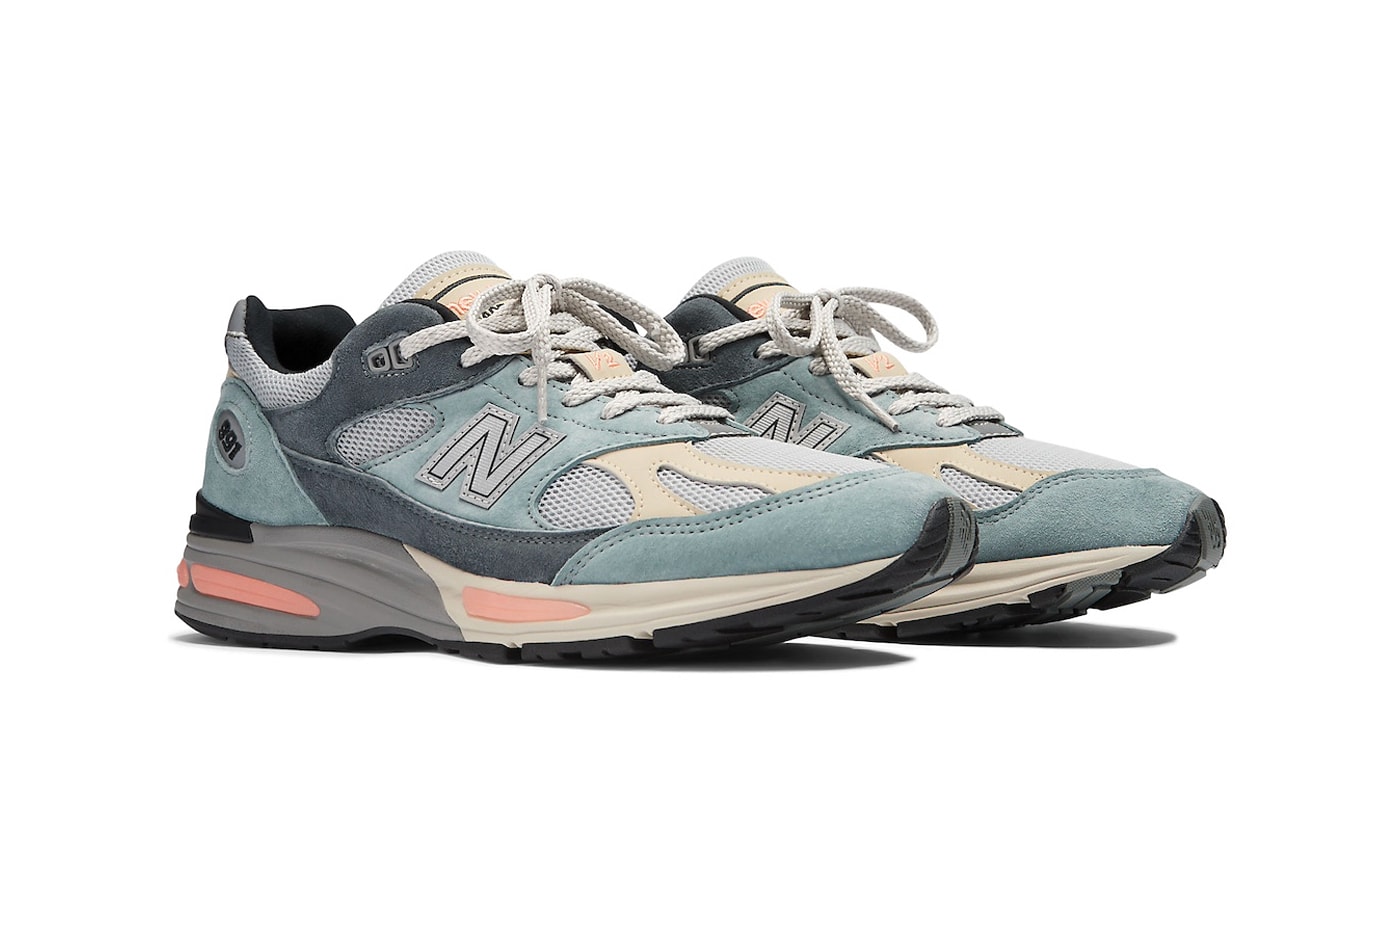 Official Look at the New Balance 991v2 "Silver Blue" U991SG2 Silver Blue/Turbulence-Quiet Grey march 2024 spring running shoe dad shoe leather suede